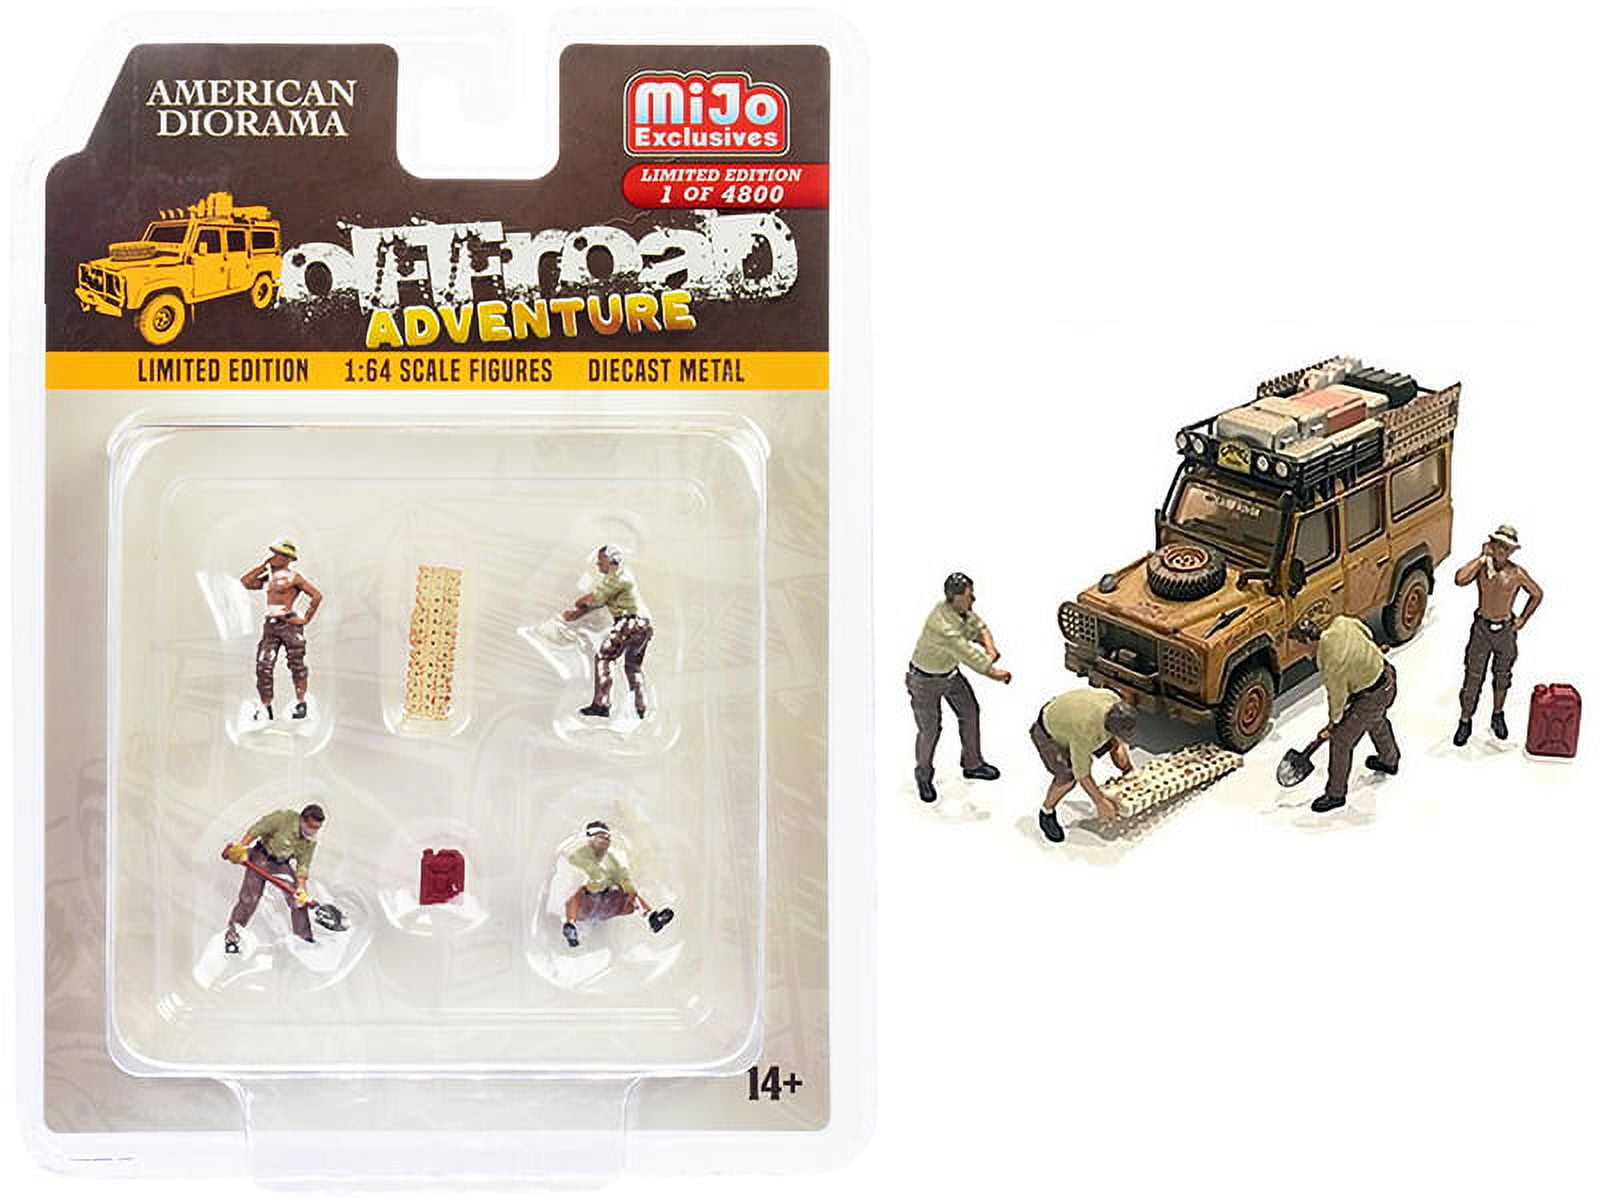 Picture of American Diorama 76492 0.75 x 1 in. 1-64 Scale Diecast off Road Adventure Diecast Limited Edition to Worldwide Model Car, Set of 4 - 6 Piece - 4800 Piece